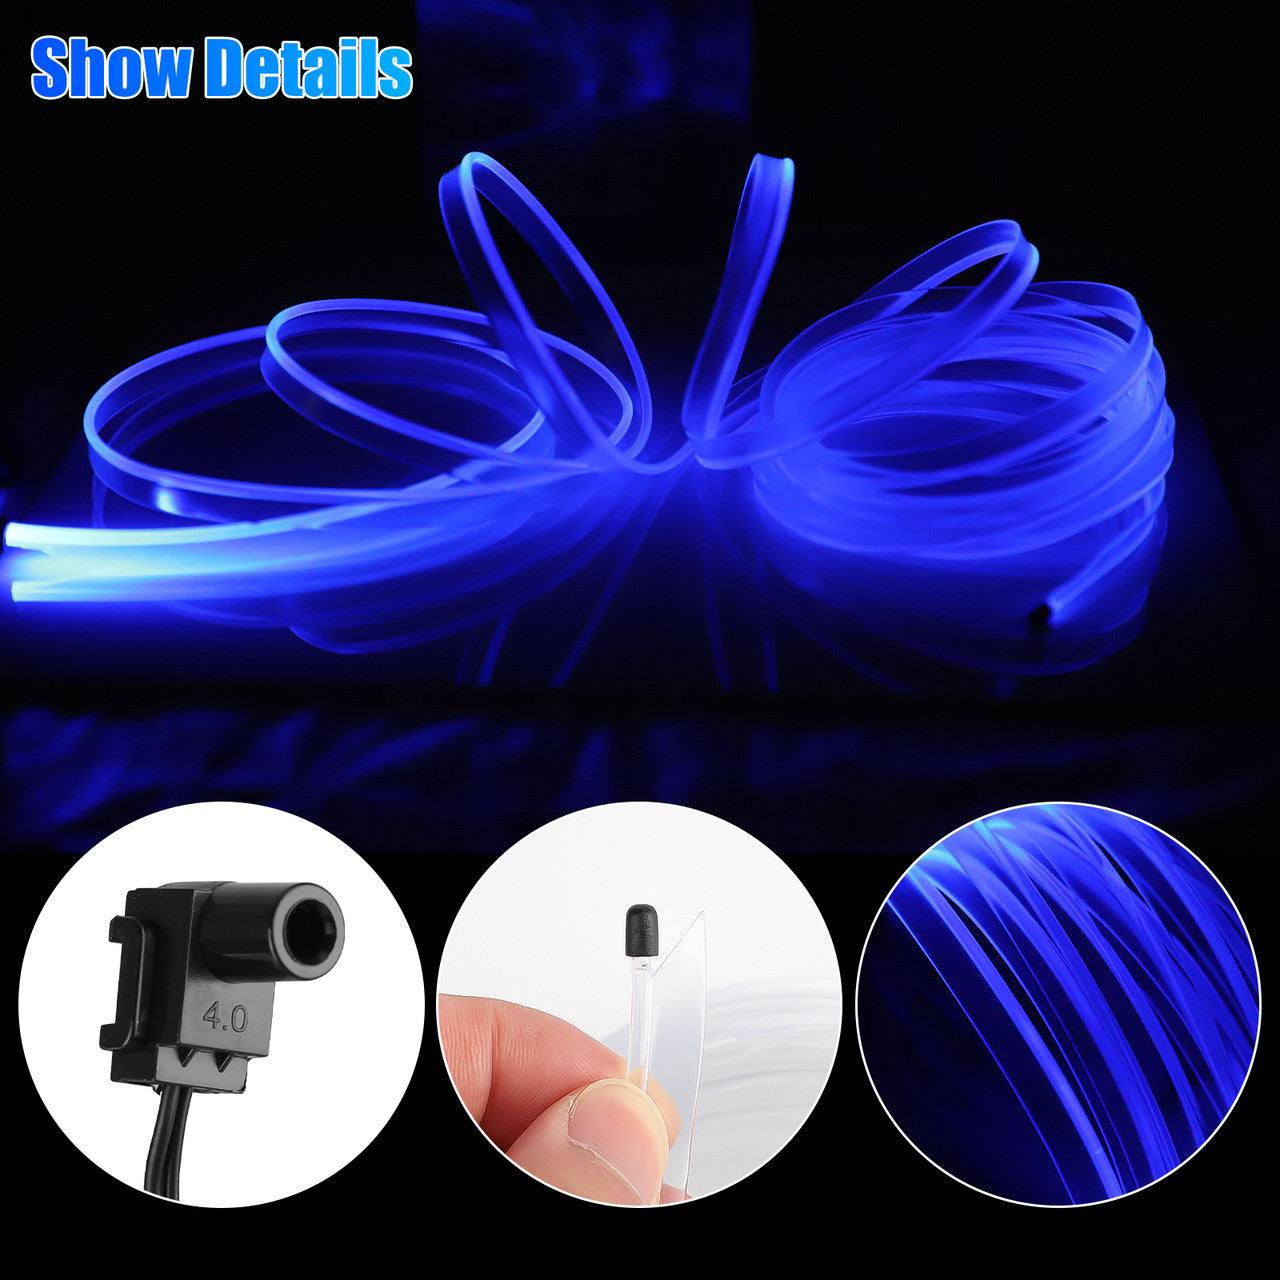 Wire Interior Car Led Strip Lights-5M/15FT USB Neon Glowing Strobing Electroluminescent Wire Lights with 6MM Sewing Edge, Ambient Lighting Kits